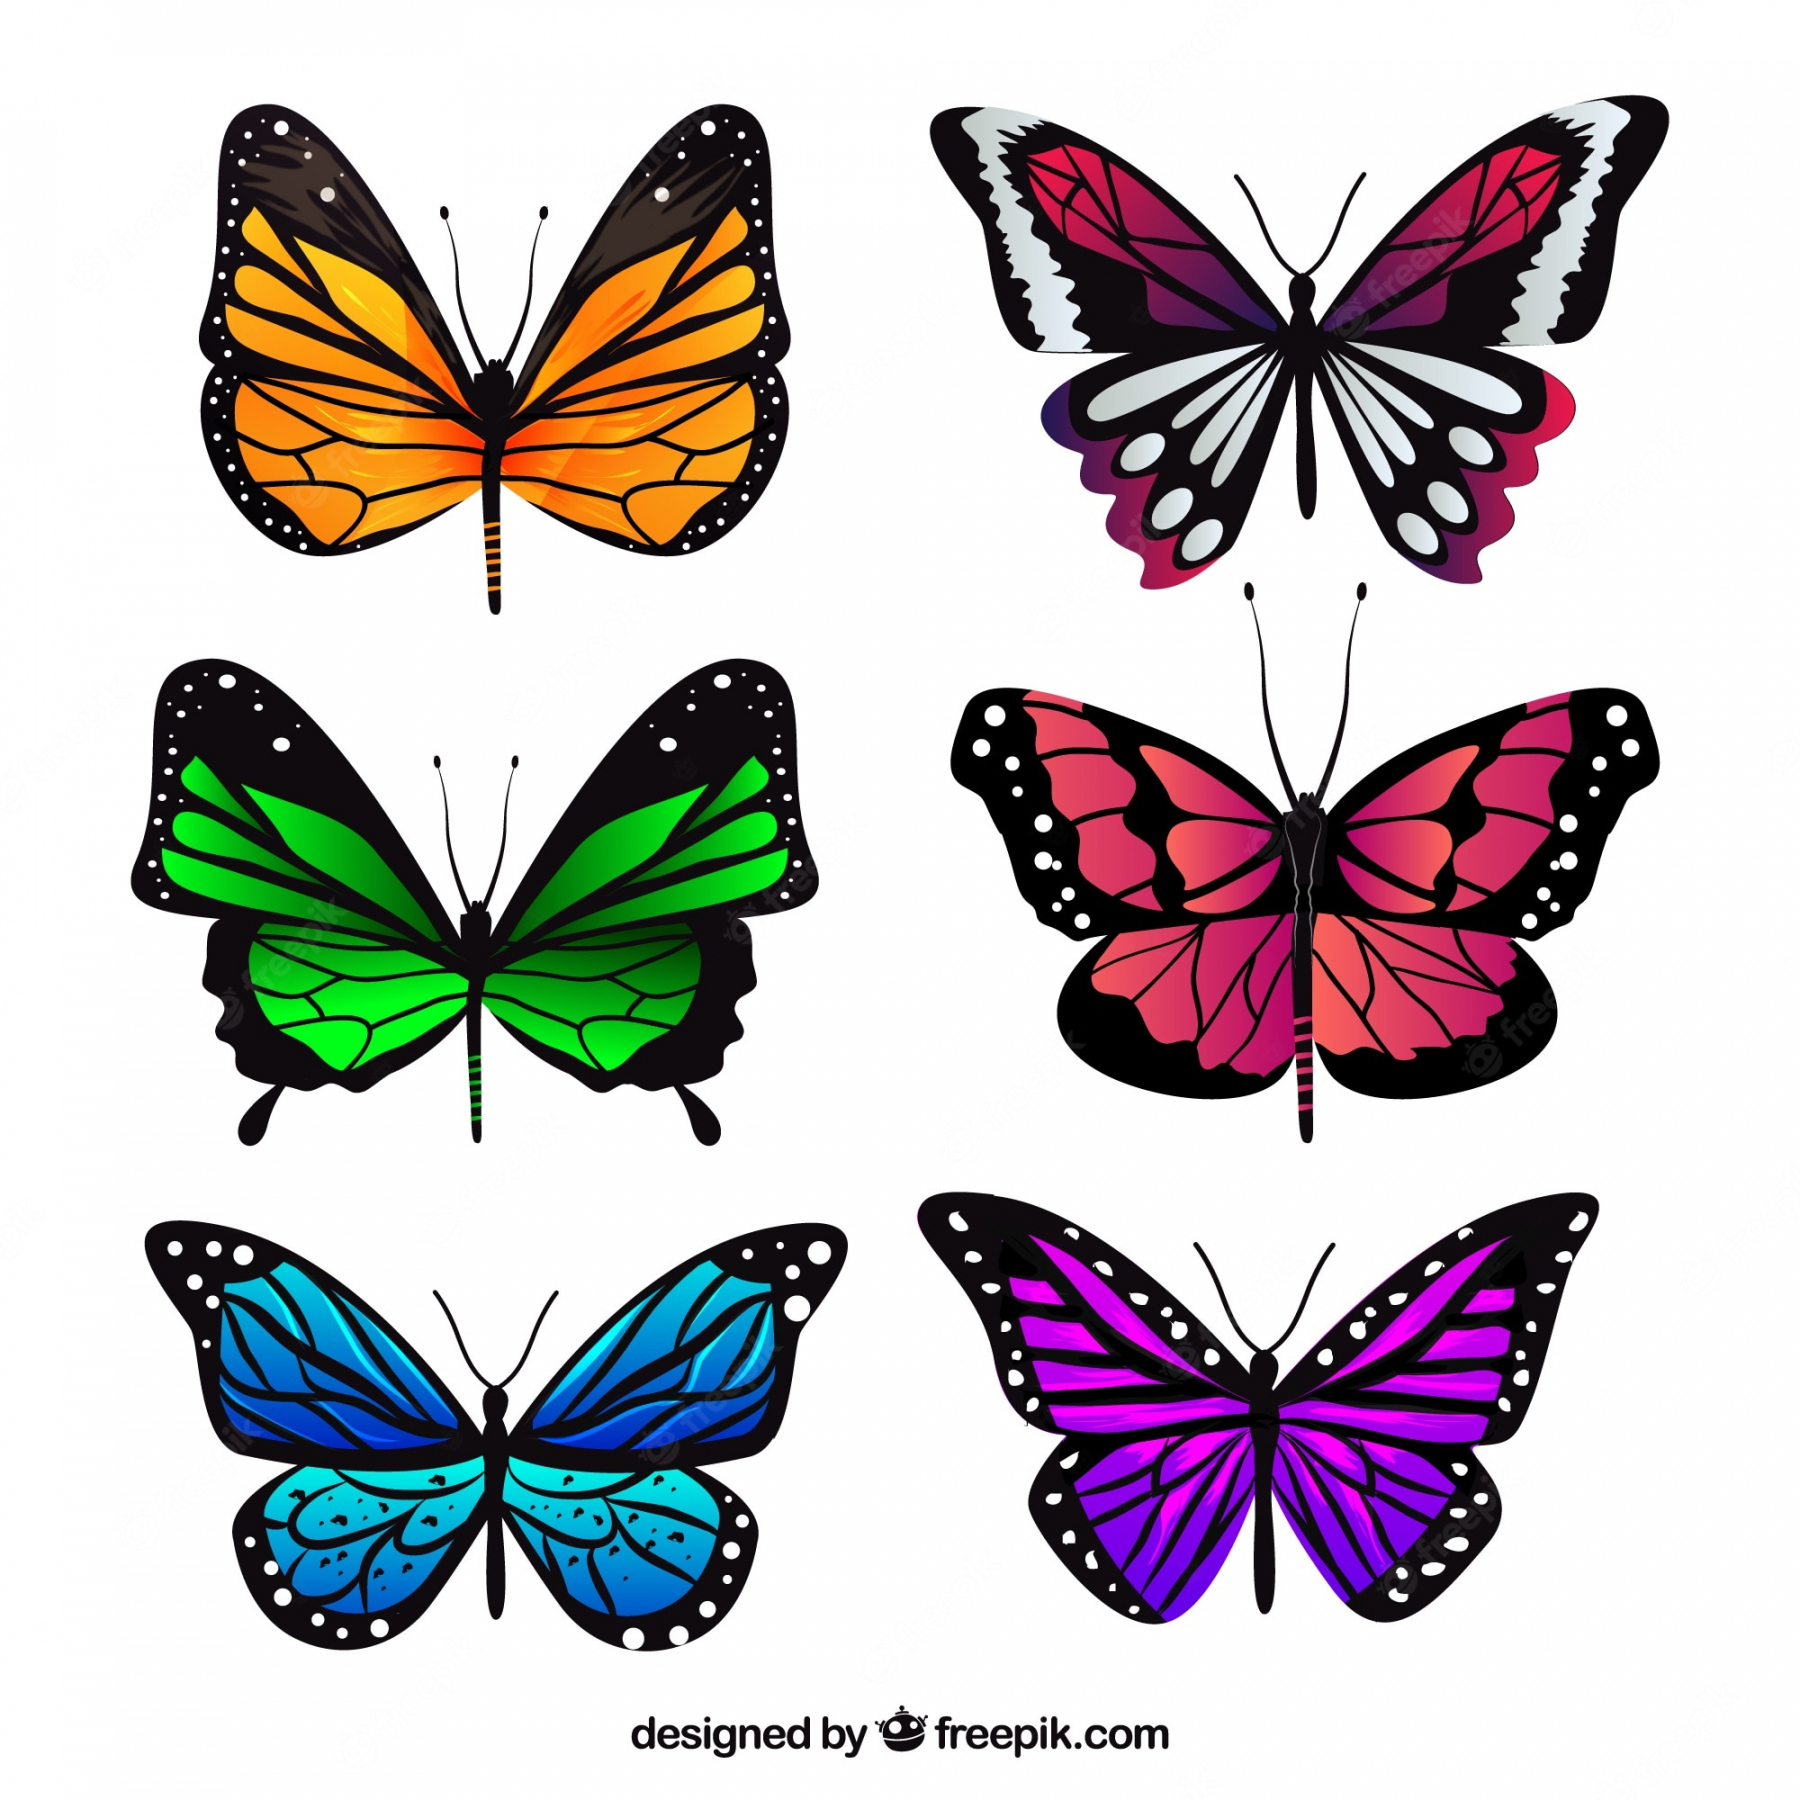 Colorful Butterfly Images - Free Download on Freepik